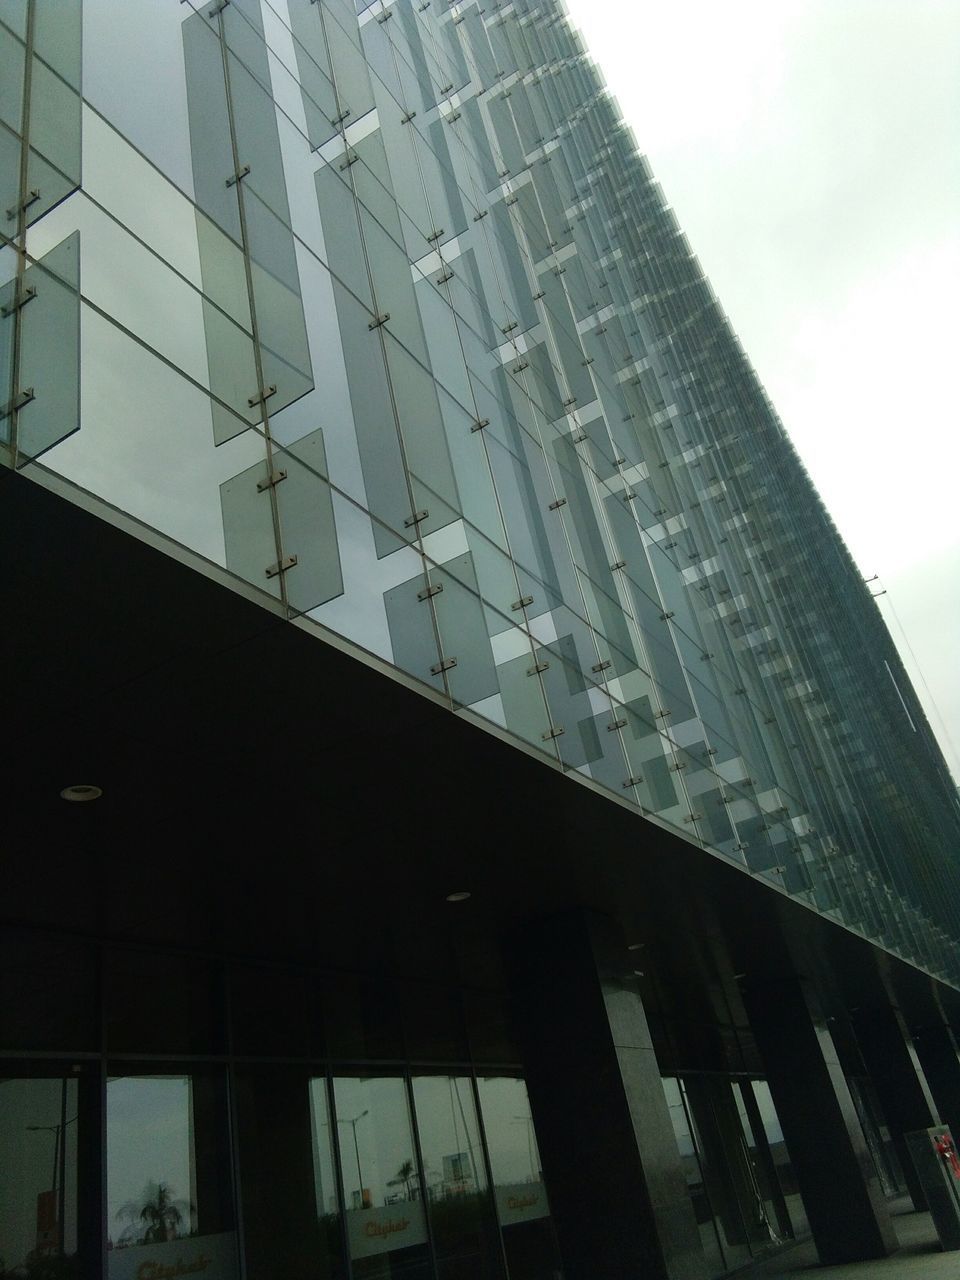 LOW ANGLE VIEW OF MODERN OFFICE BUILDING